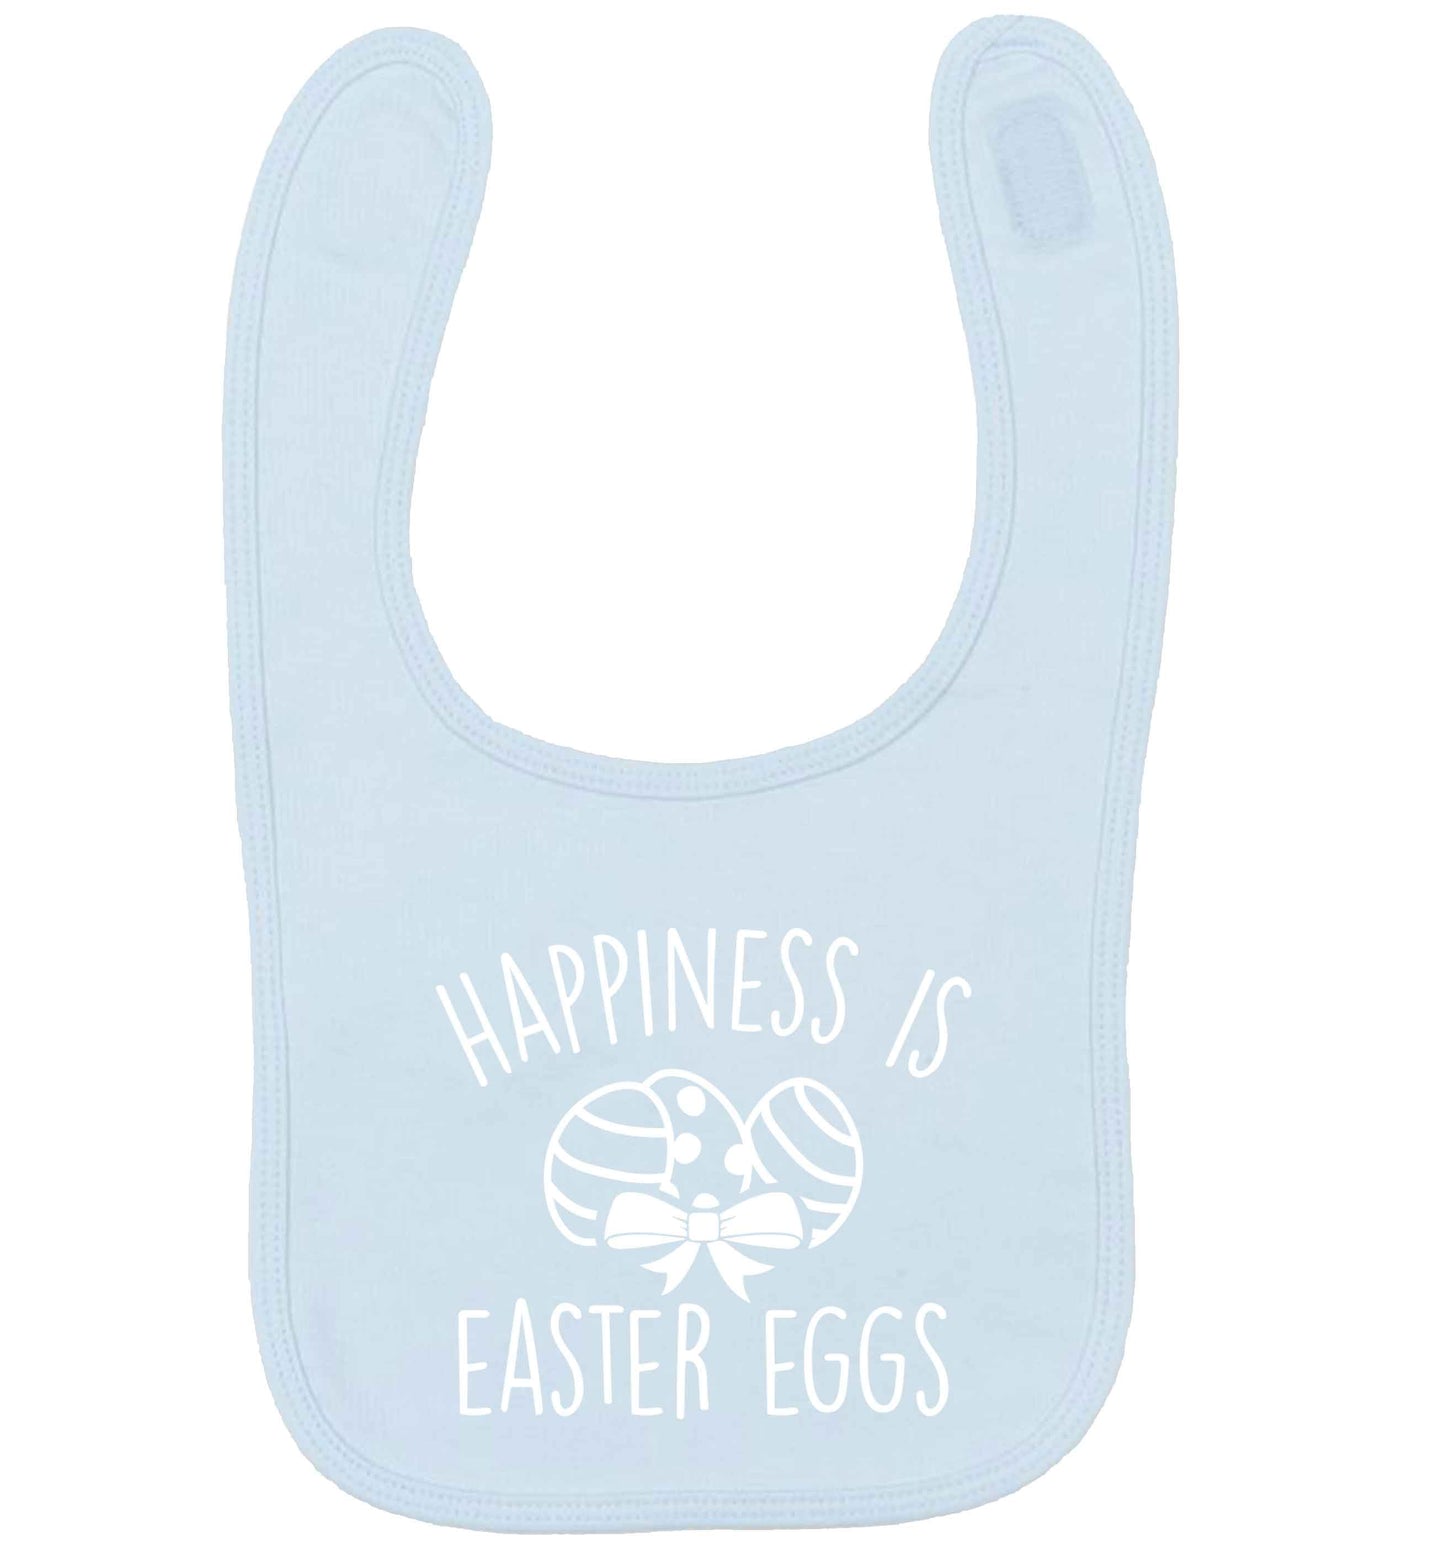 Happiness is Easter eggs pale blue baby bib